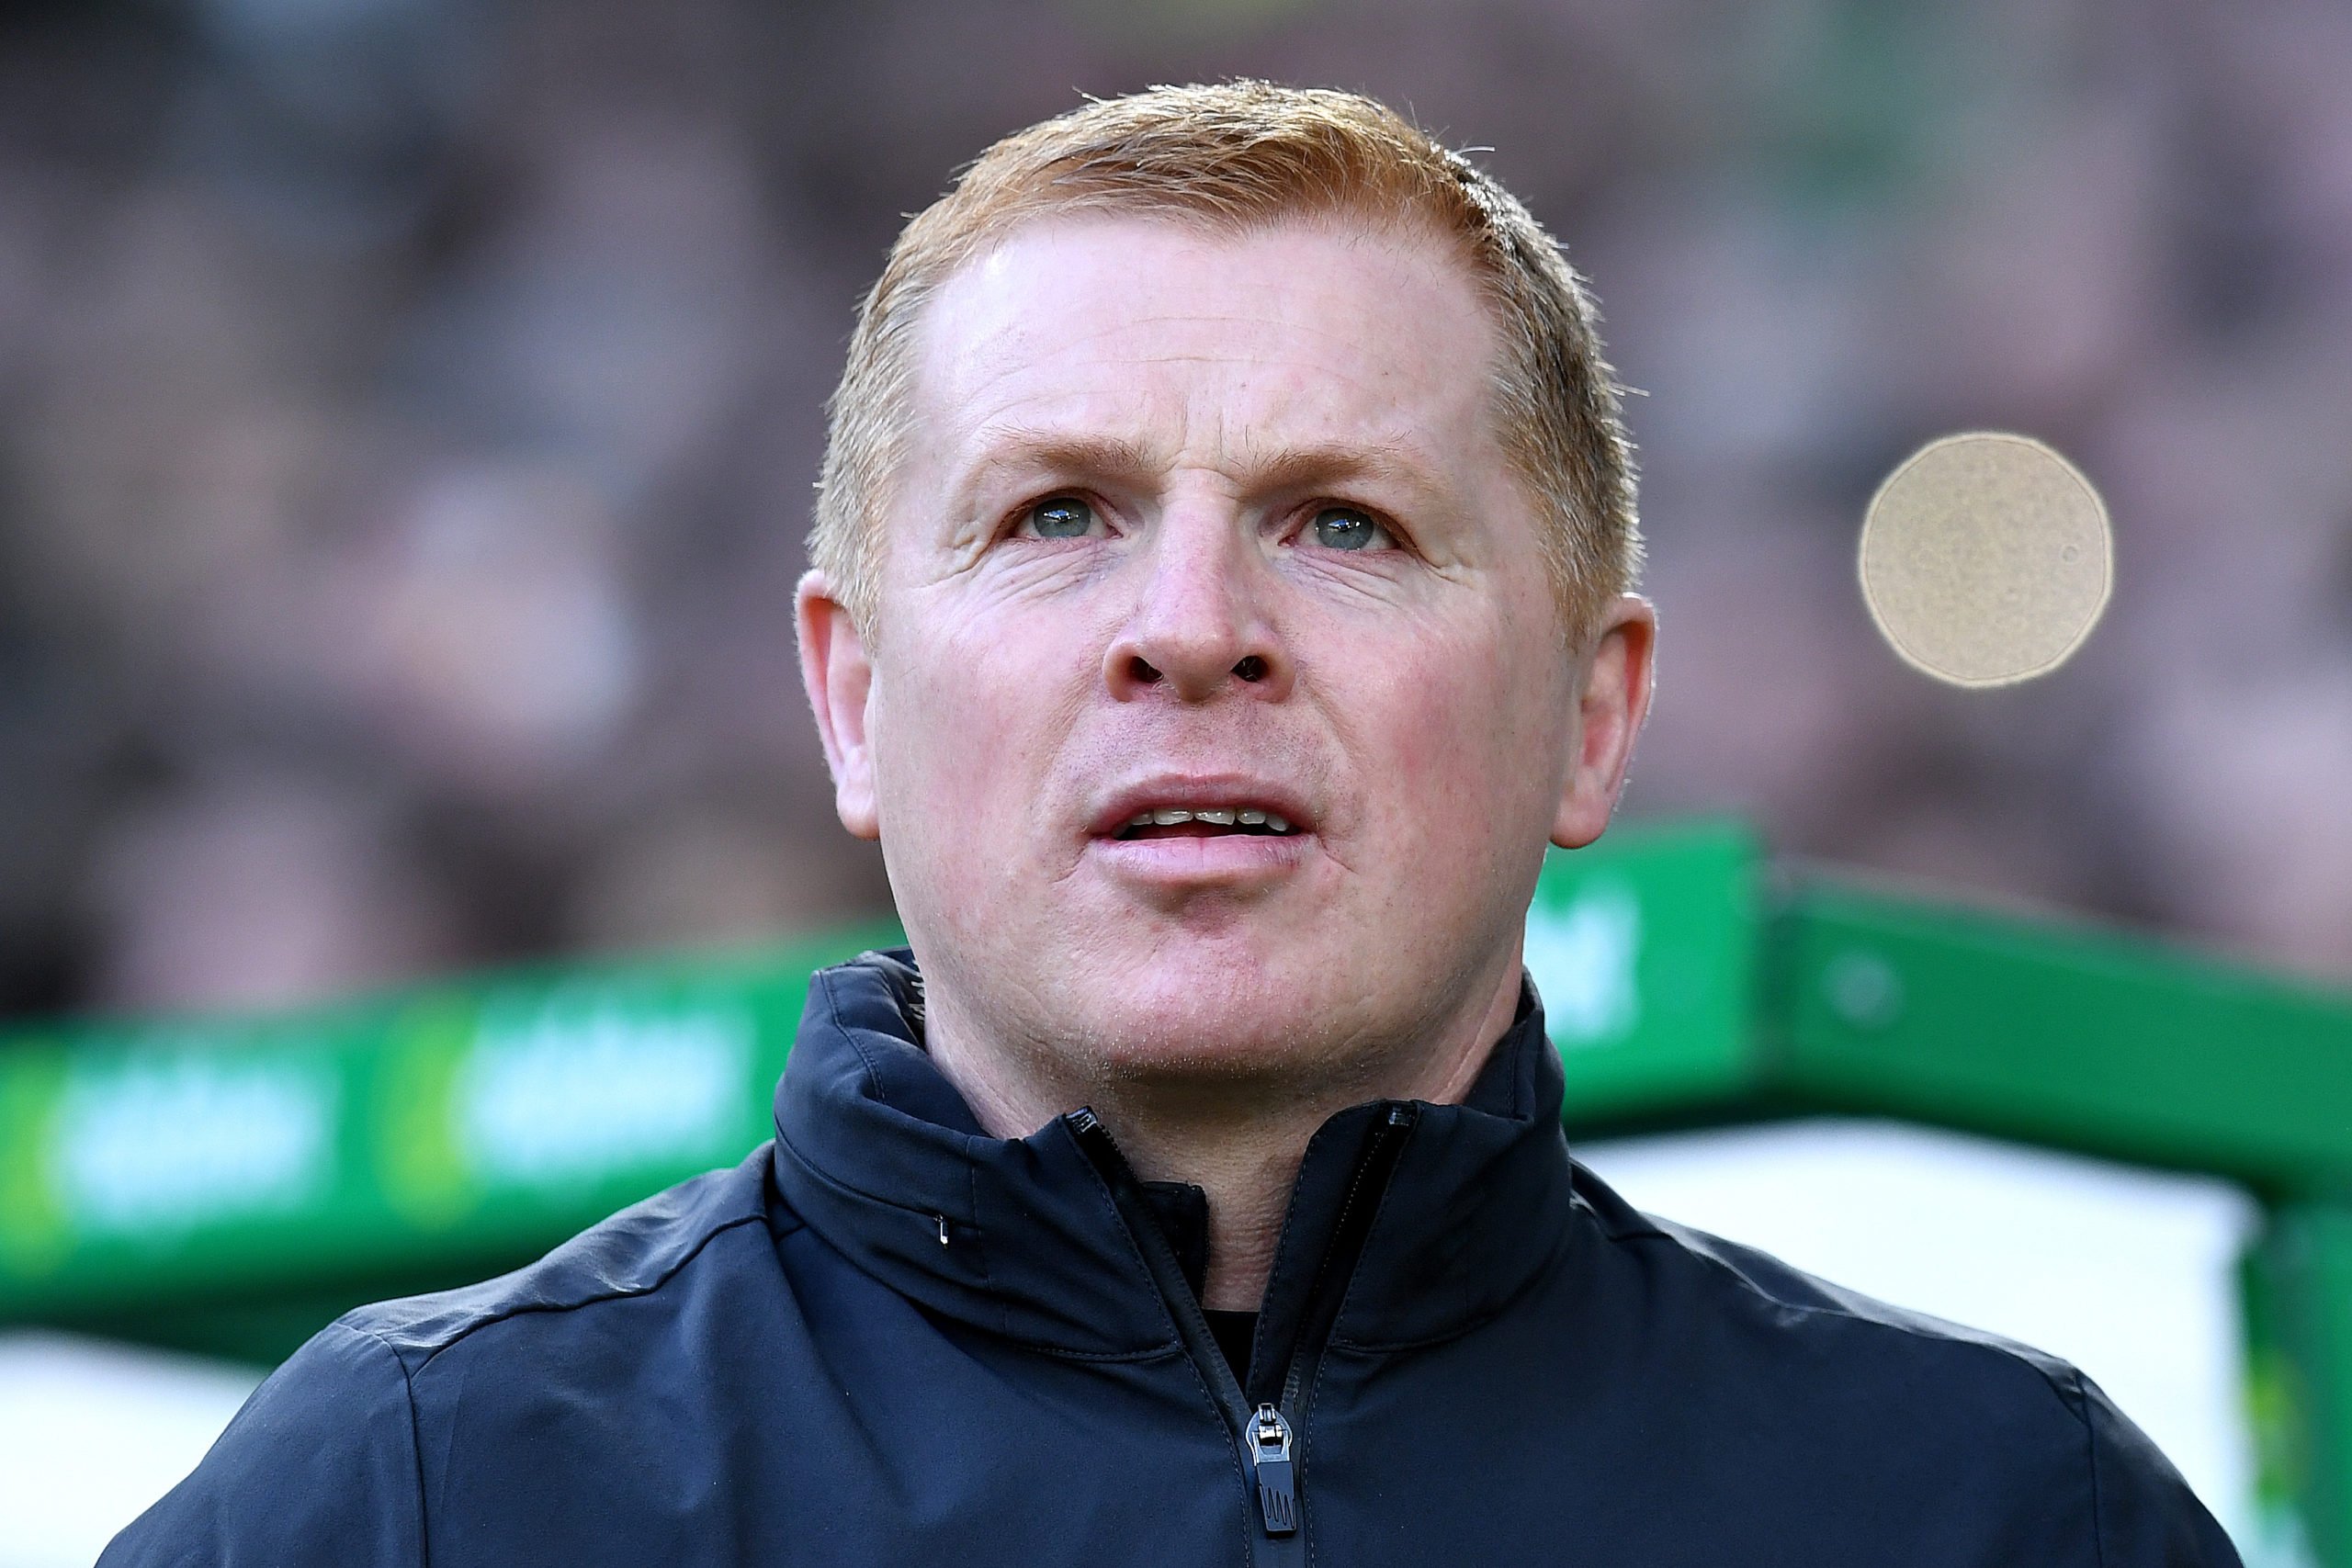 Celtic need to bring back fear factor; Motherwell man's comments hint at decline